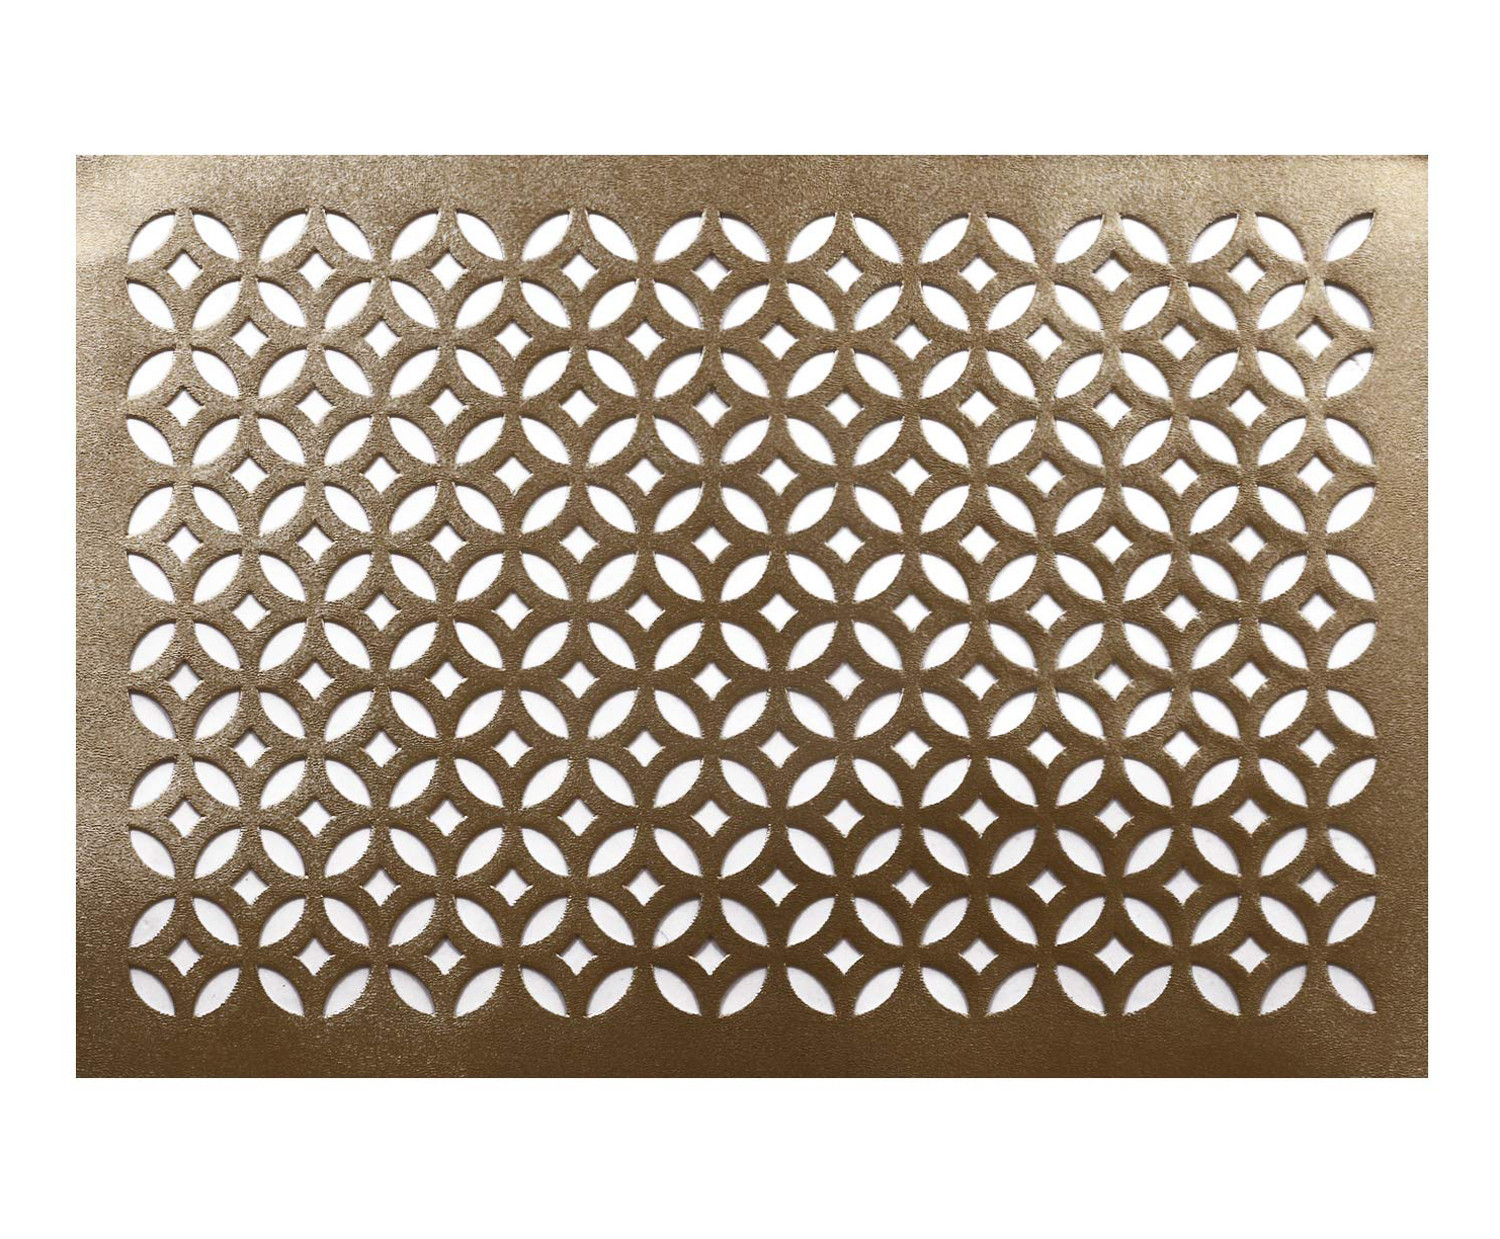 Kuber Industries Rectangular Soft Leather Table Placemats, Set of 4 (Gold)